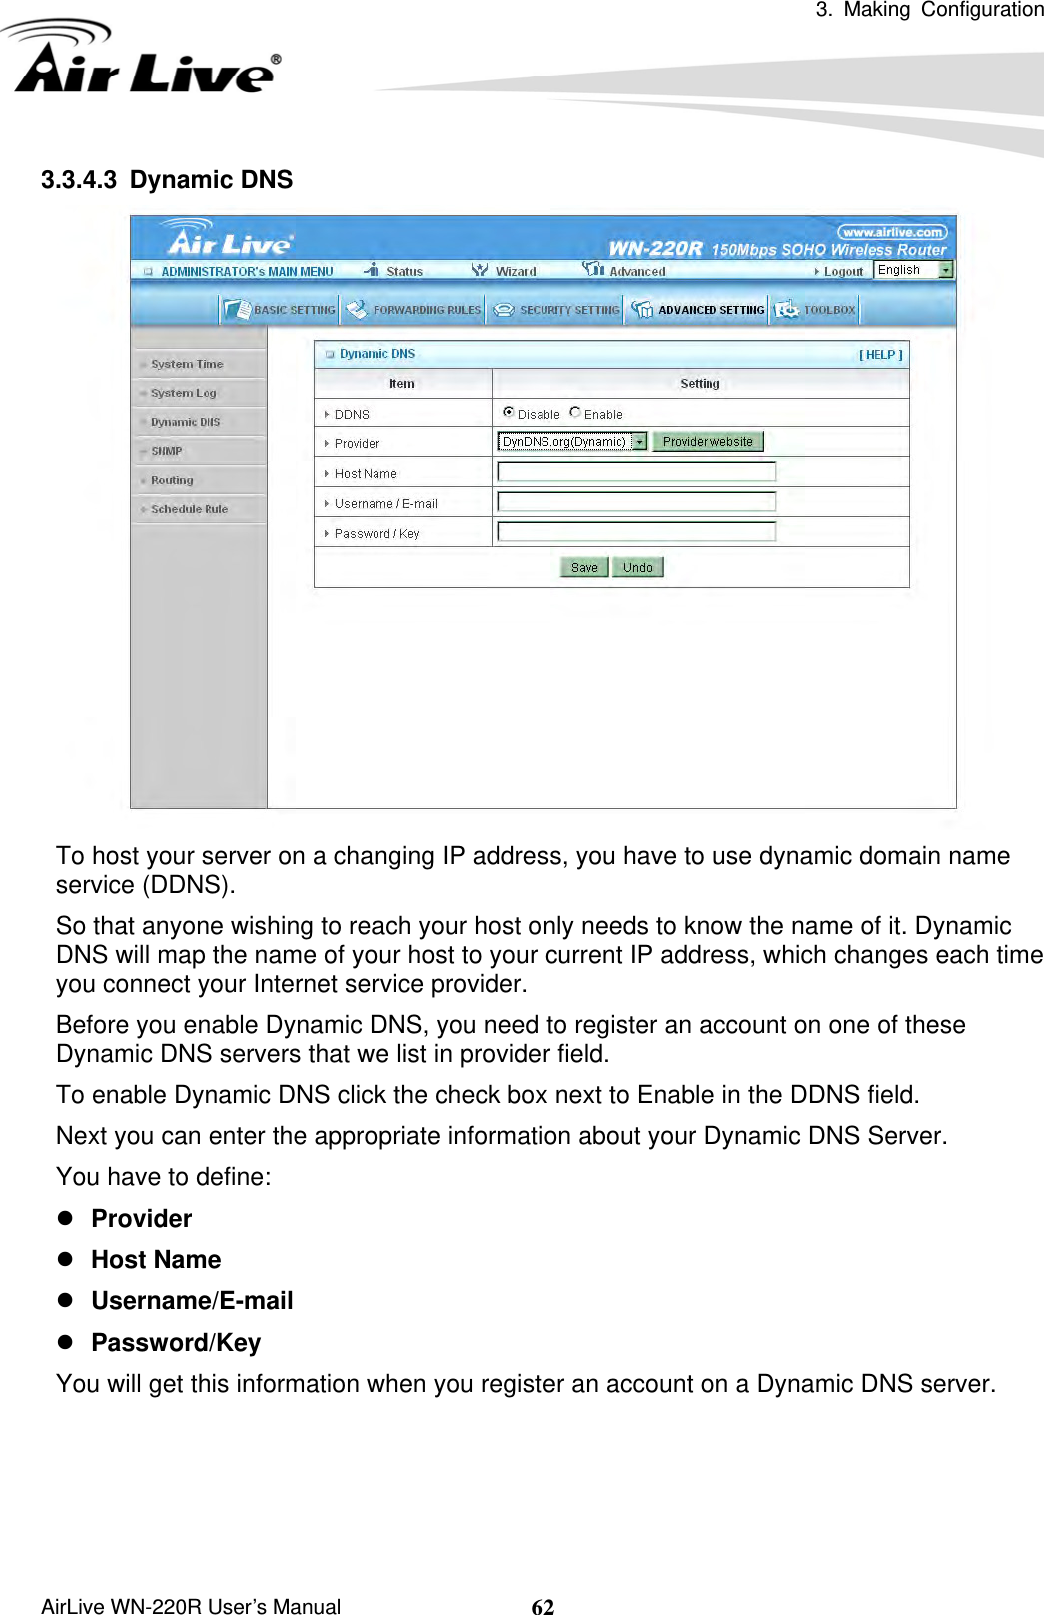  3. Making Configuration       AirLive WN-220R User’s Manual  623.3.4.3 Dynamic DNS  To host your server on a changing IP address, you have to use dynamic domain name service (DDNS).   So that anyone wishing to reach your host only needs to know the name of it. Dynamic DNS will map the name of your host to your current IP address, which changes each time you connect your Internet service provider.   Before you enable Dynamic DNS, you need to register an account on one of these Dynamic DNS servers that we list in provider field.   To enable Dynamic DNS click the check box next to Enable in the DDNS field. Next you can enter the appropriate information about your Dynamic DNS Server. You have to define: z Provider z Host Name z Username/E-mail z Password/Key You will get this information when you register an account on a Dynamic DNS server.     